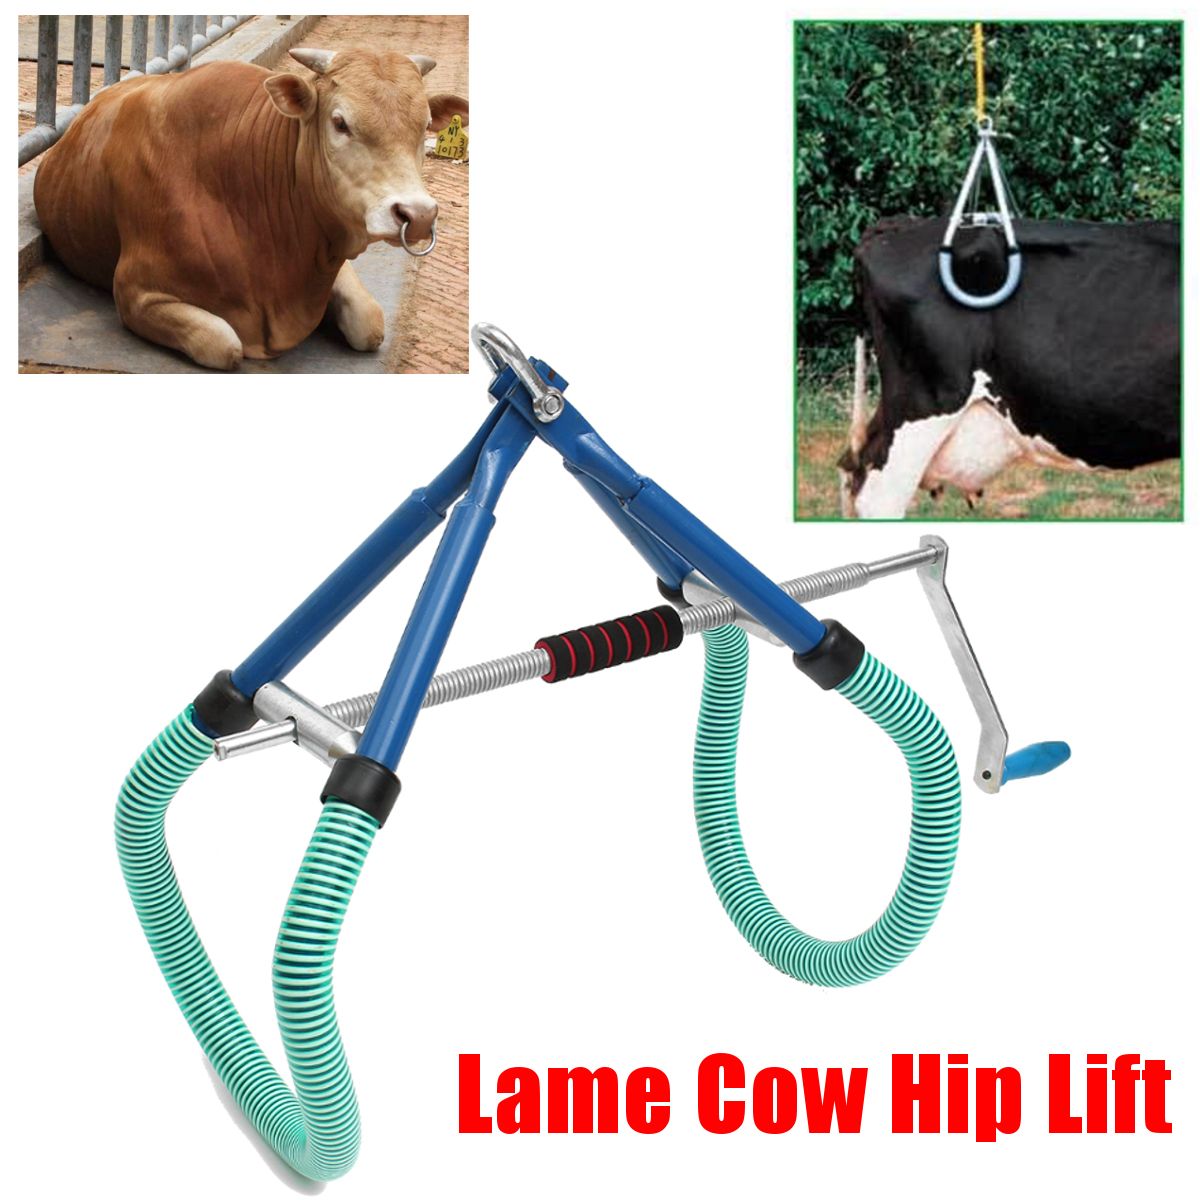 Cow-Hip-Lift-OB-Calving-Milking-Birthing-Lame-Cow-Easy-and-Fast-for-Emergencies-Hook-1265617